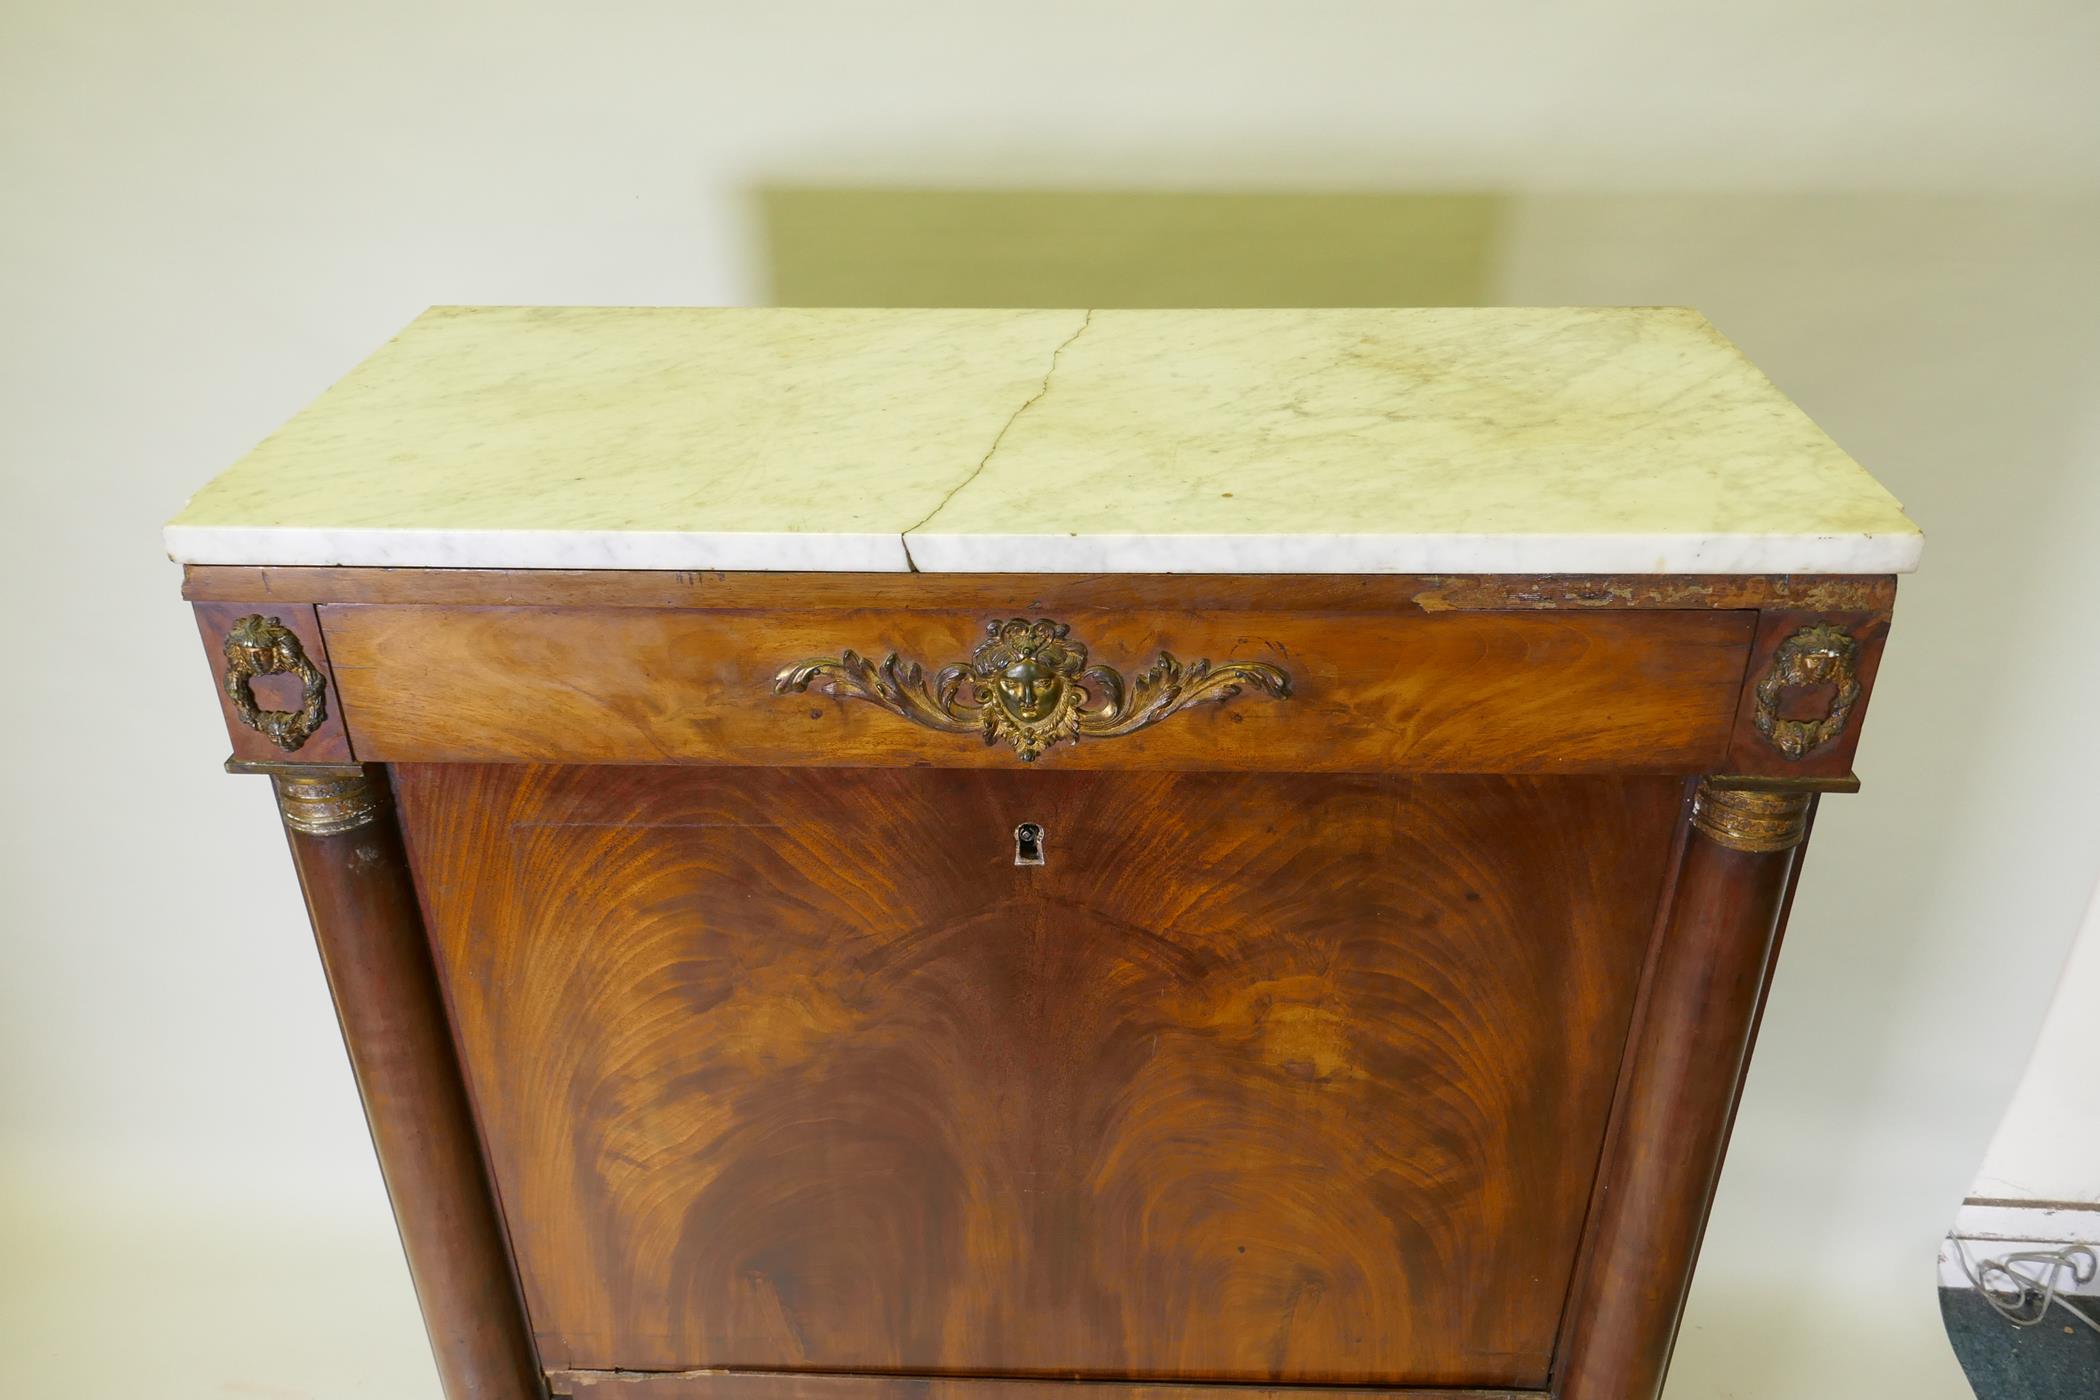 A C19th continental figured mahogany secretaire a abattant with ormolu mounts and marble top over - Image 2 of 6